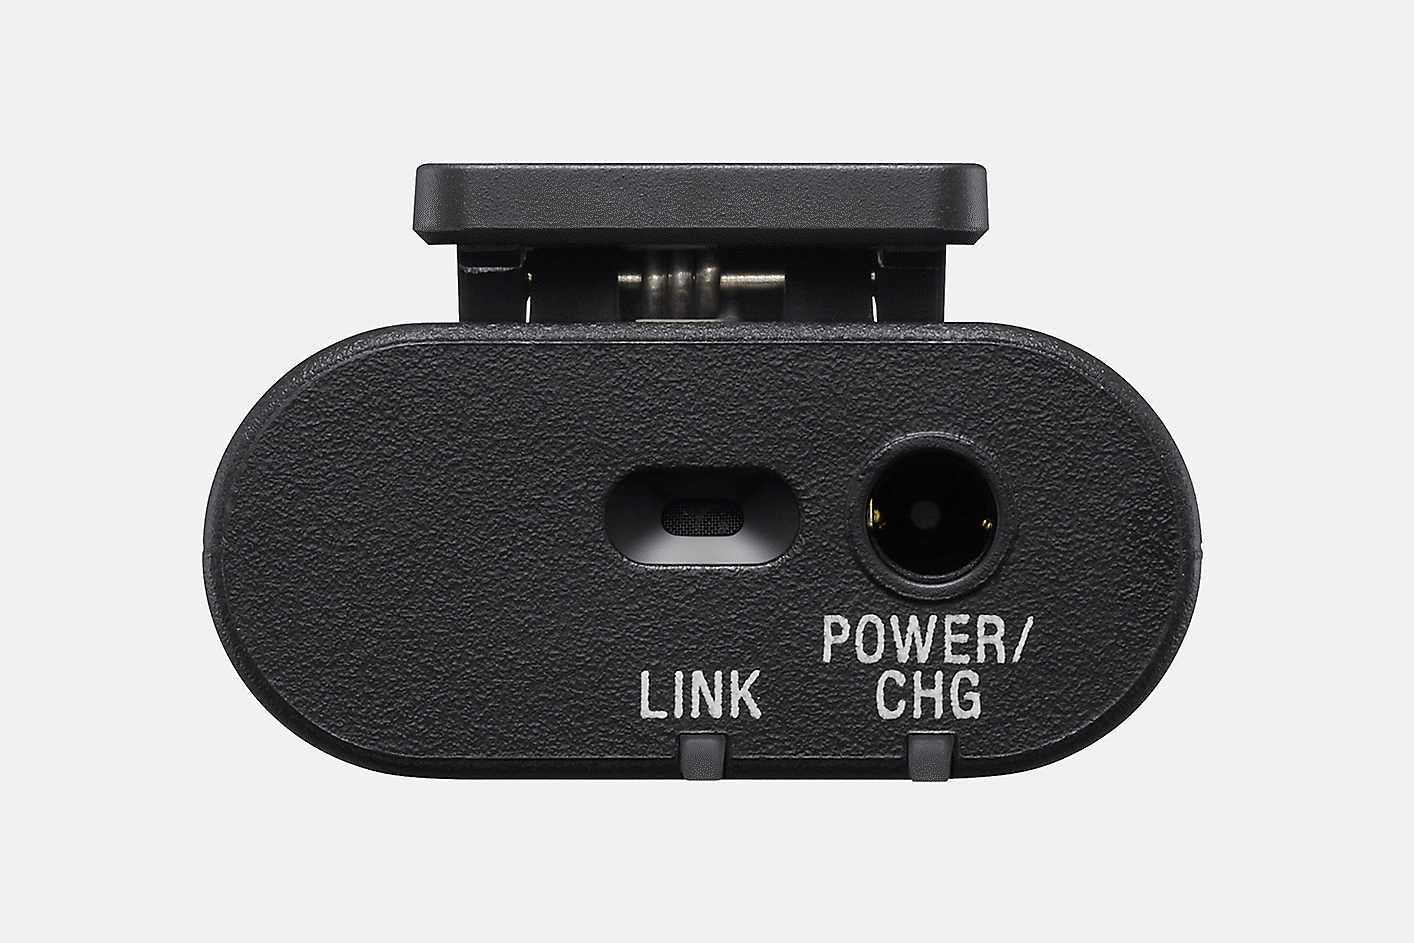 Product image showing the 3.5-mm stereo mini-jack on top of the transmitter